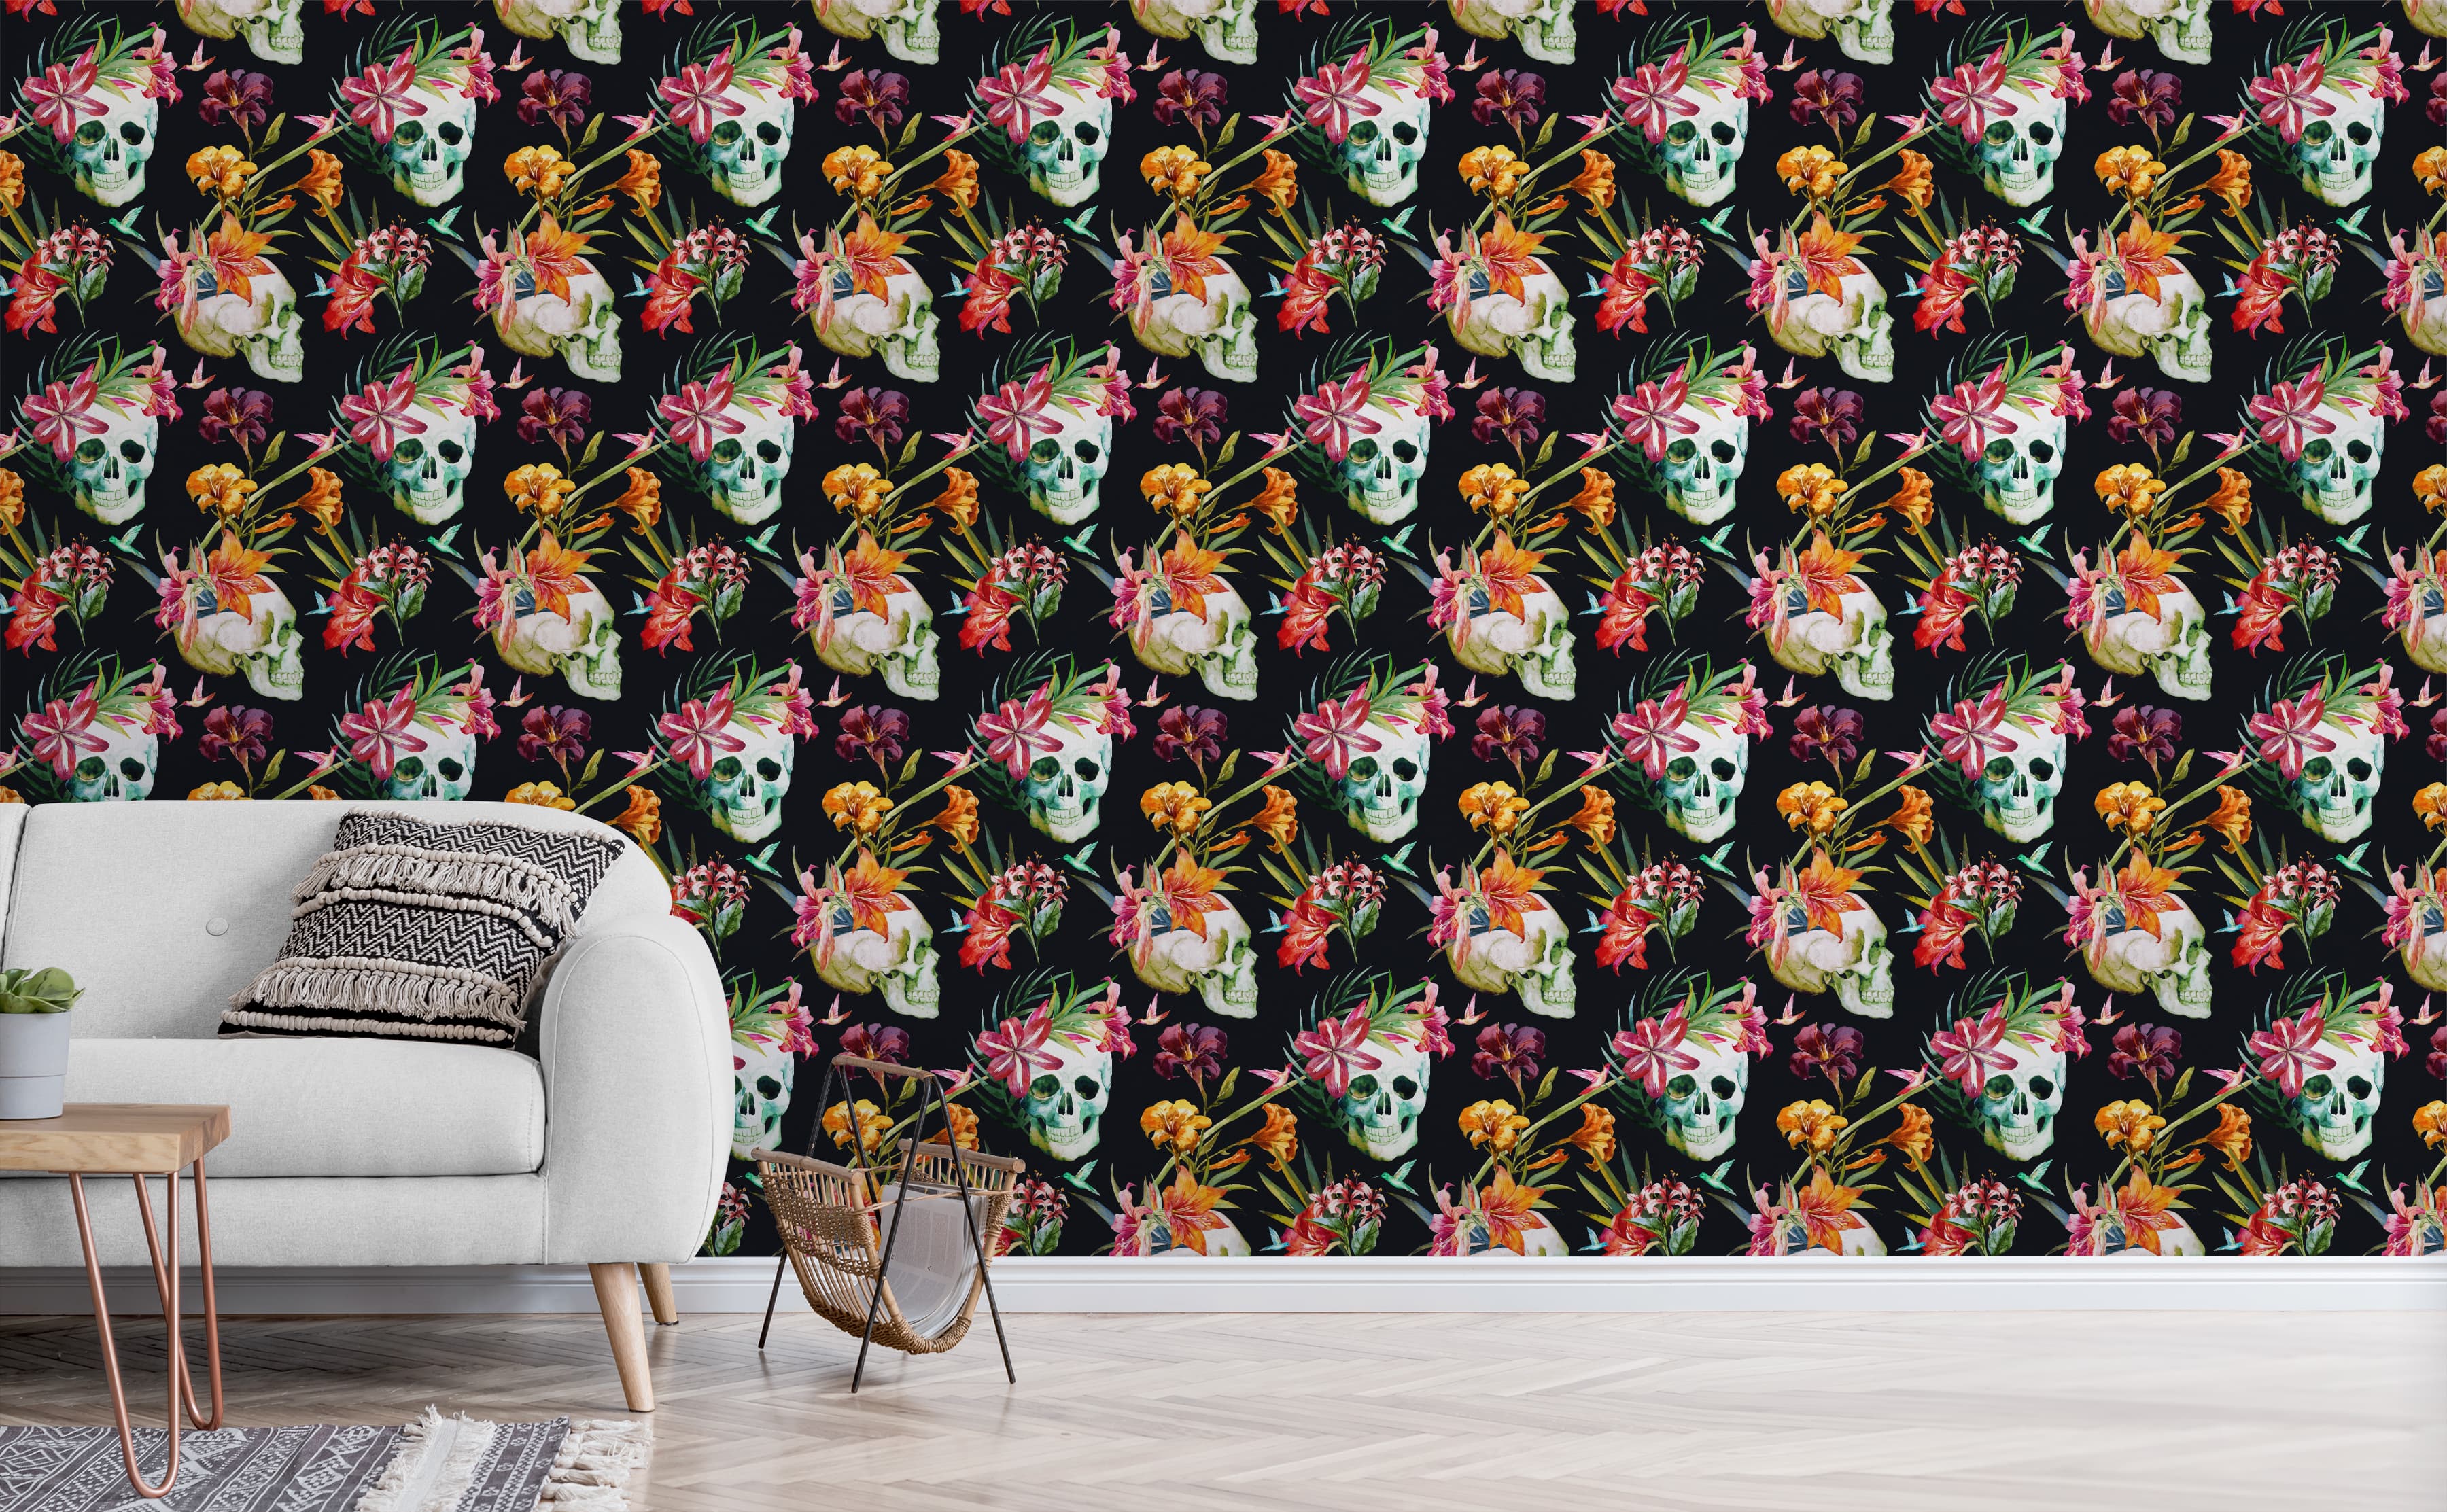 Sugar Skull Floral Accent Peel and Stick Wallpaper Removable - Etsy